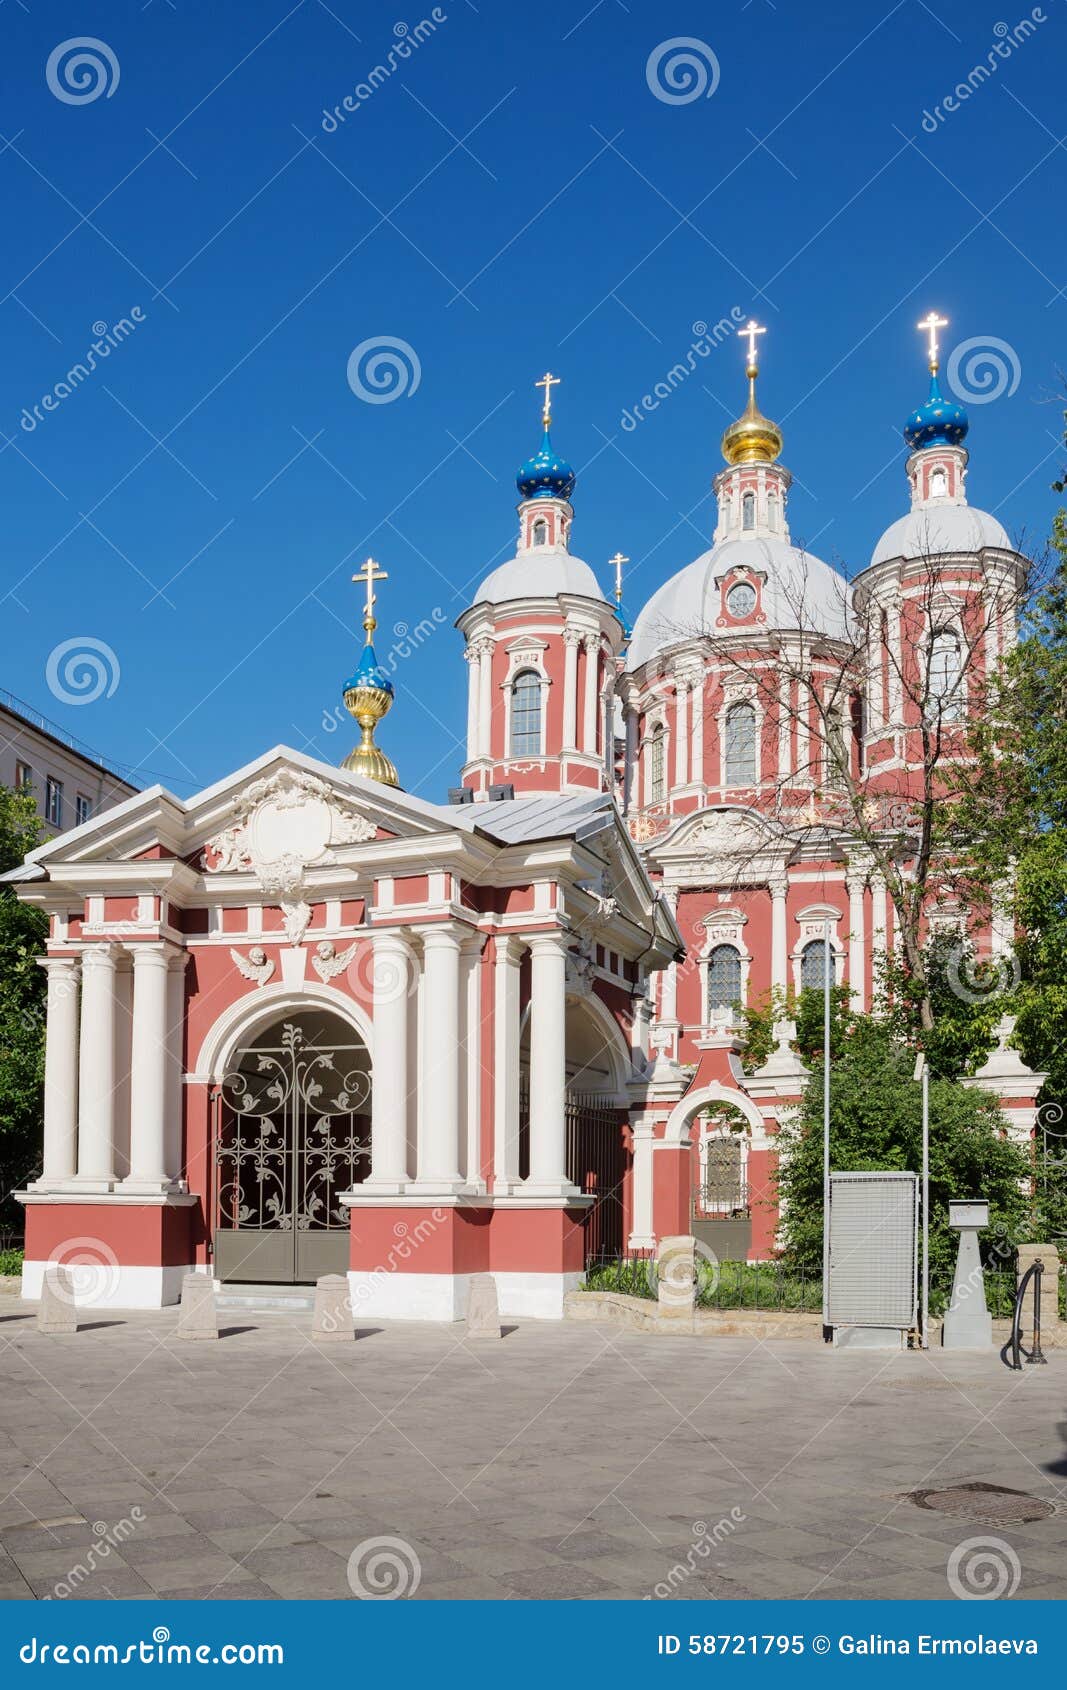 church of st. clement, the pope, moscow